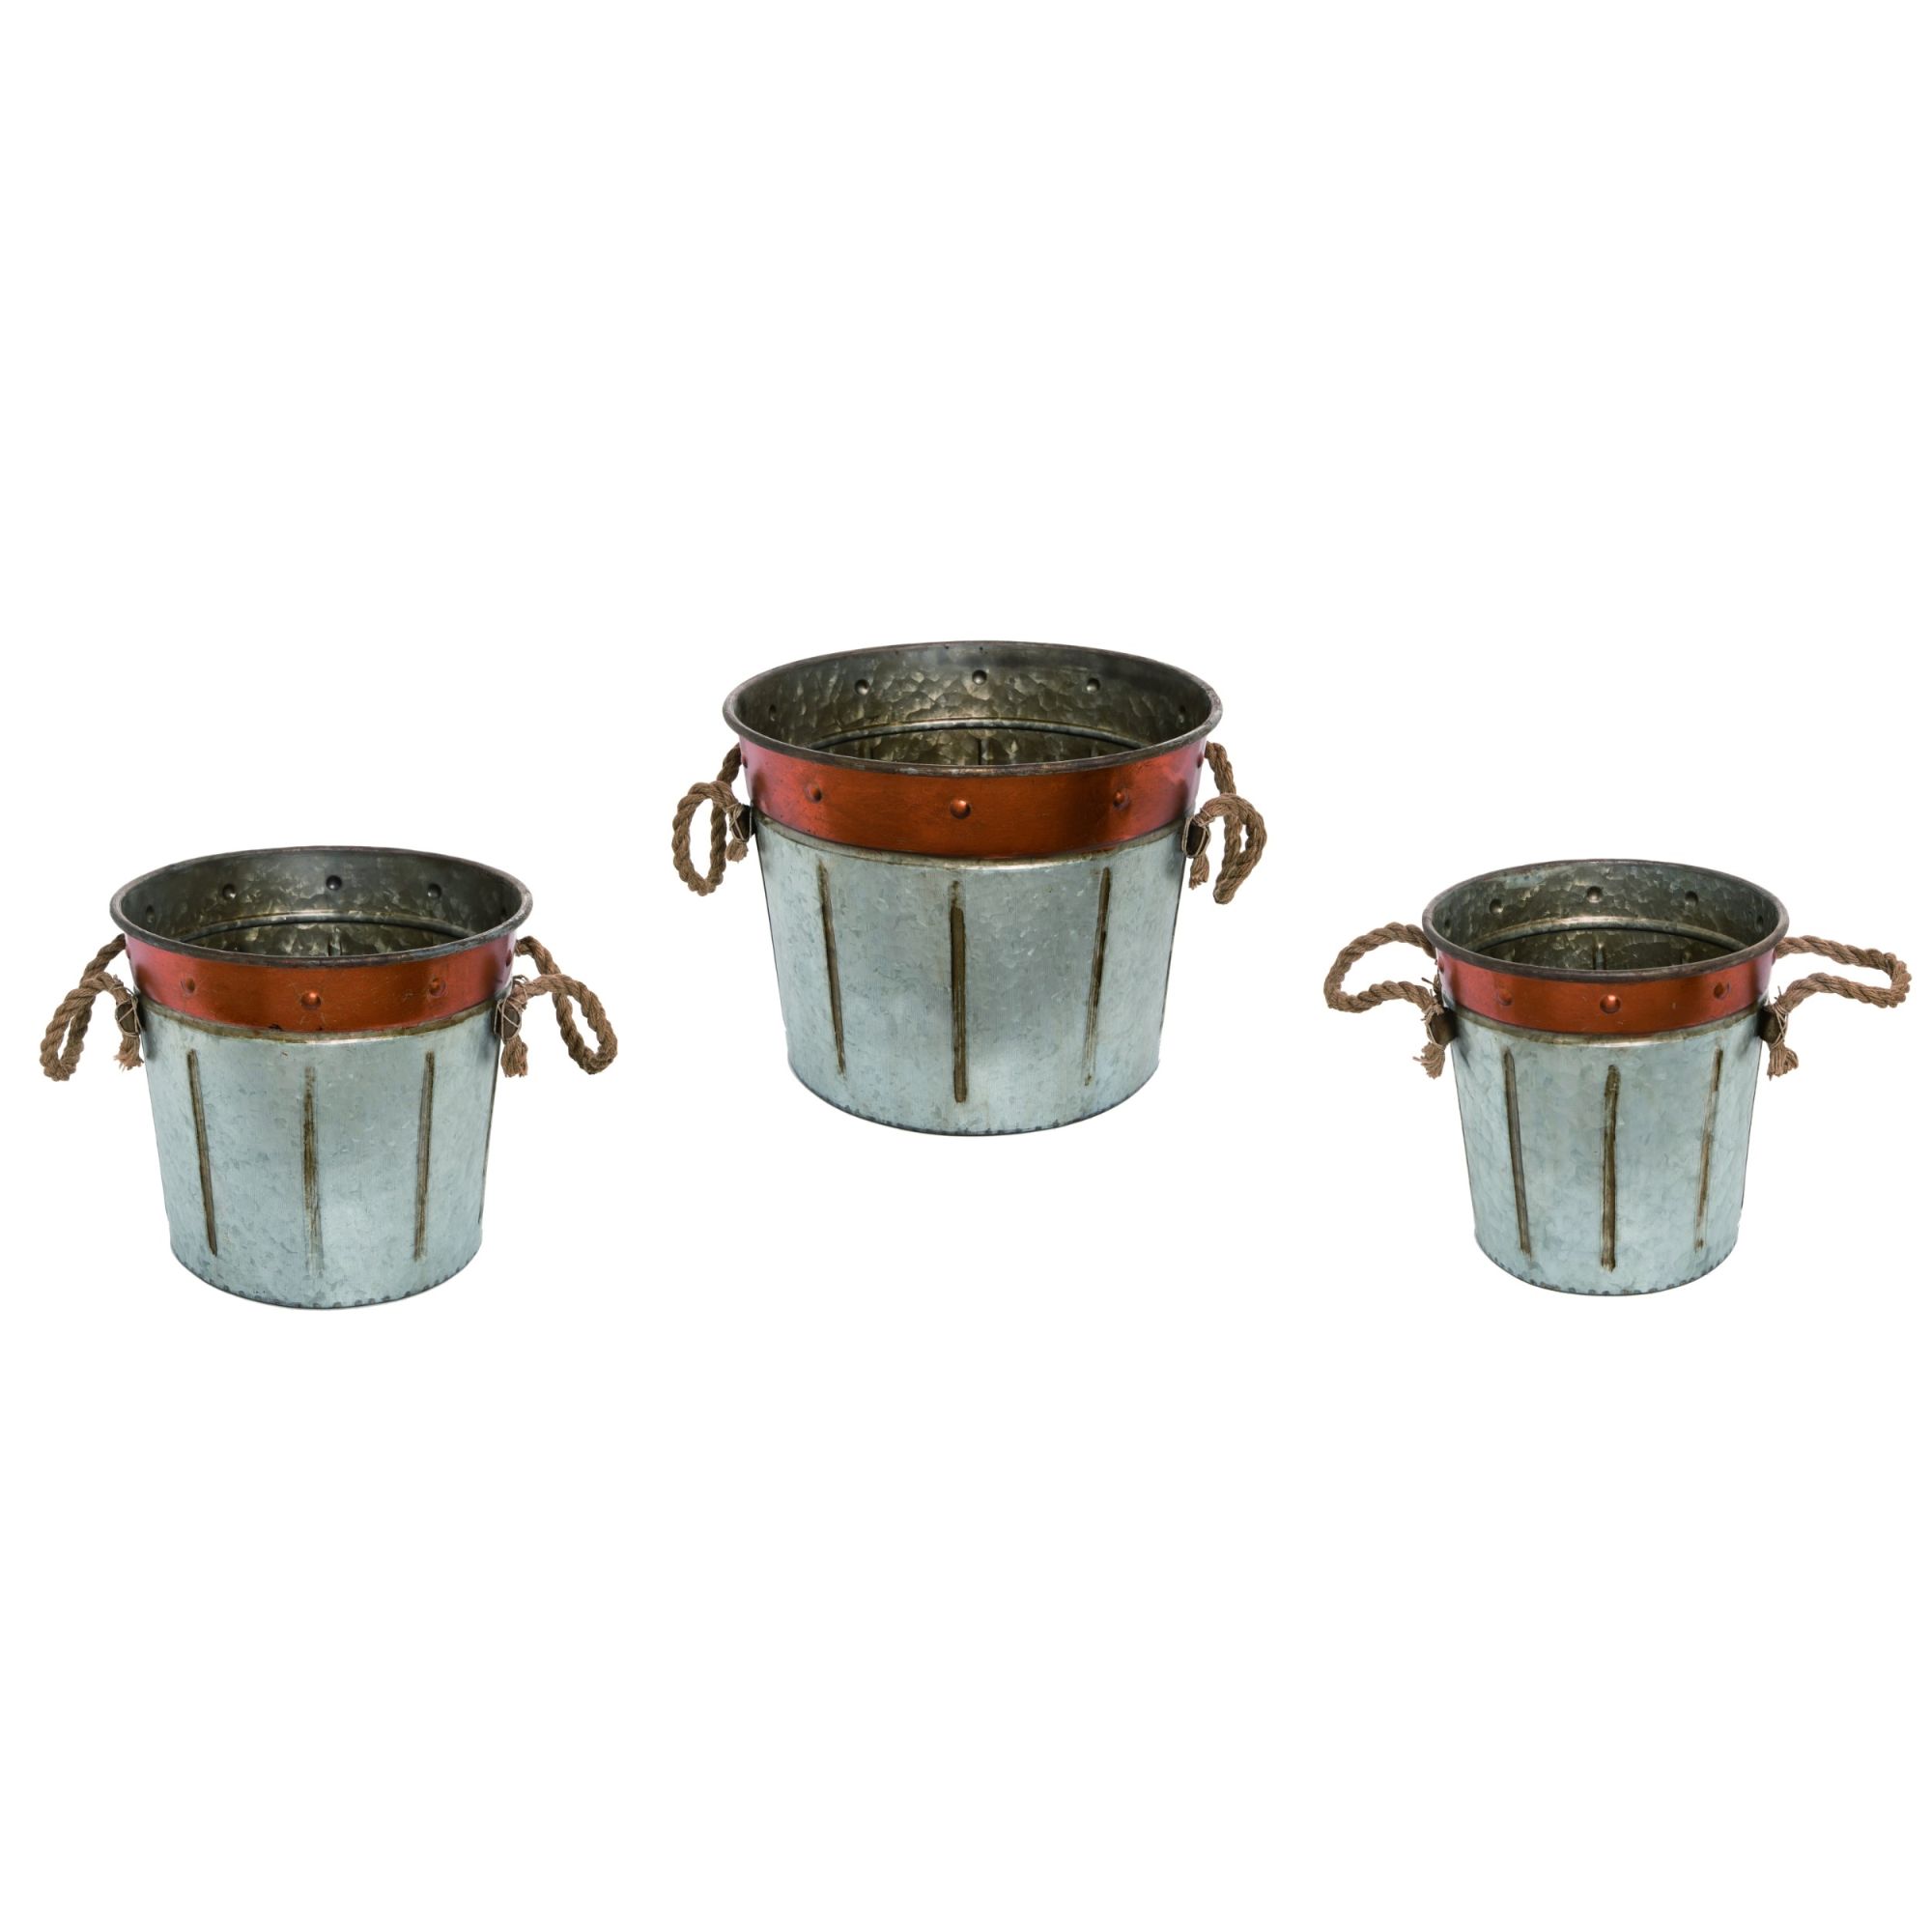 Contemporary Home Living Set of 3 Rustic Galvanized Buckets Thanksgiving Decorations 15"